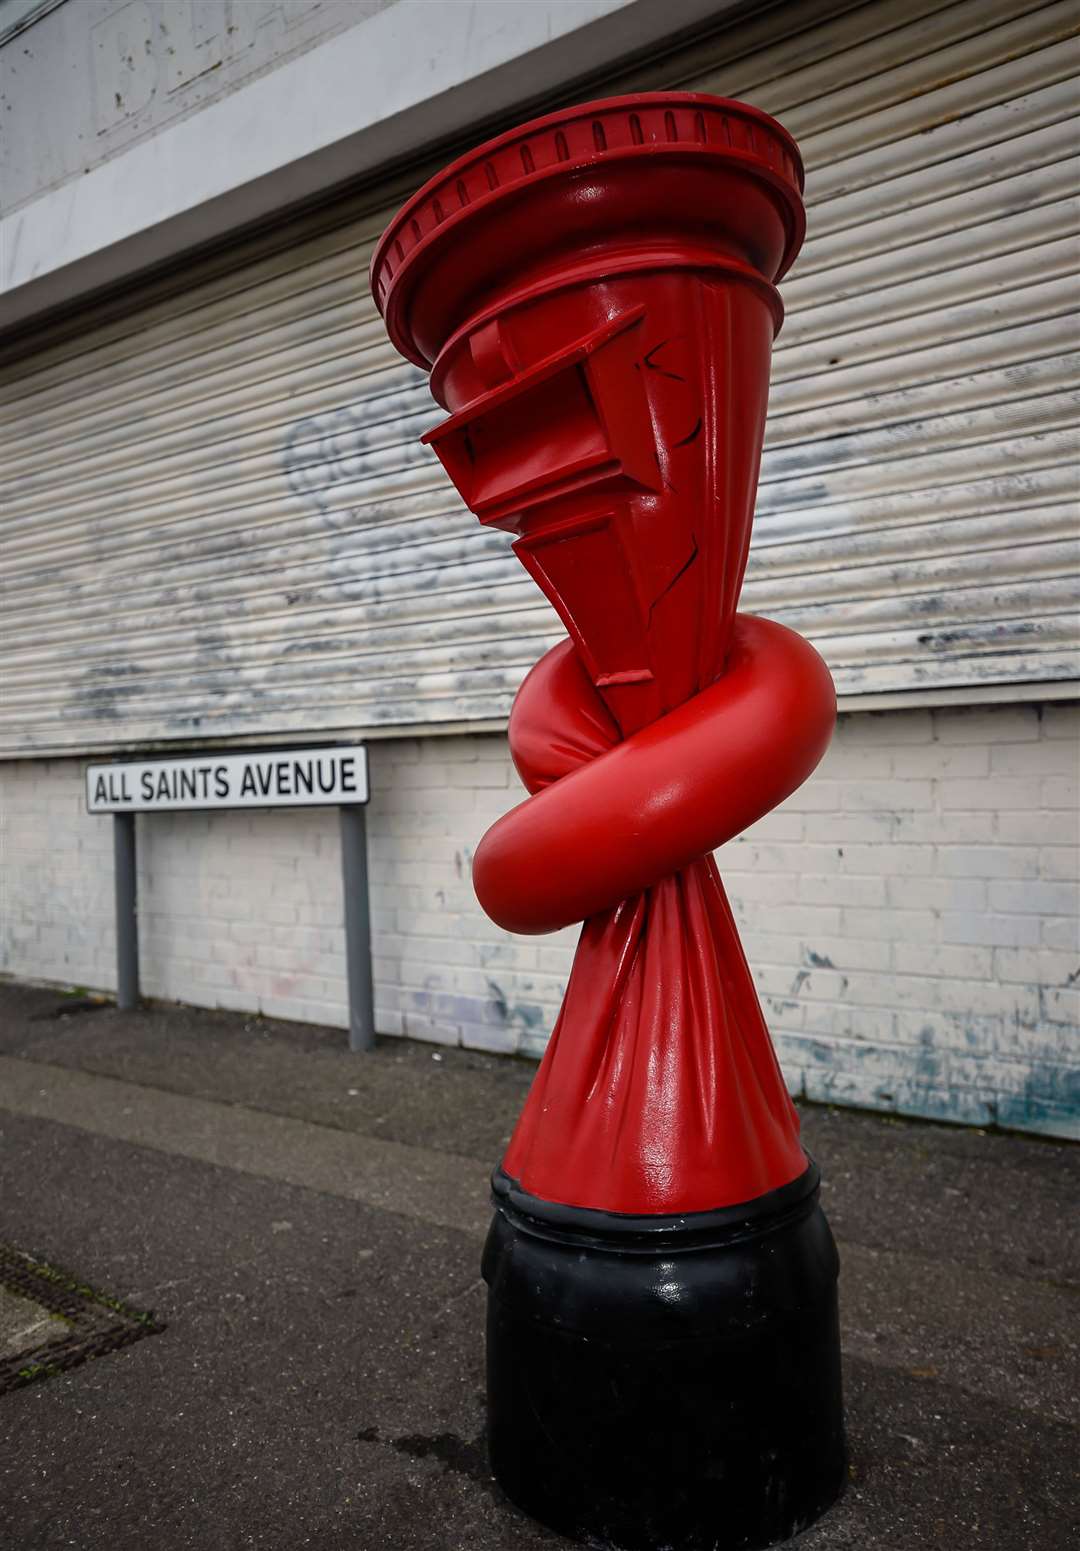 The red twisted postbox by Alphabetti Spaghetti in All Saints Avenue, Margate Picture: Alan Langley